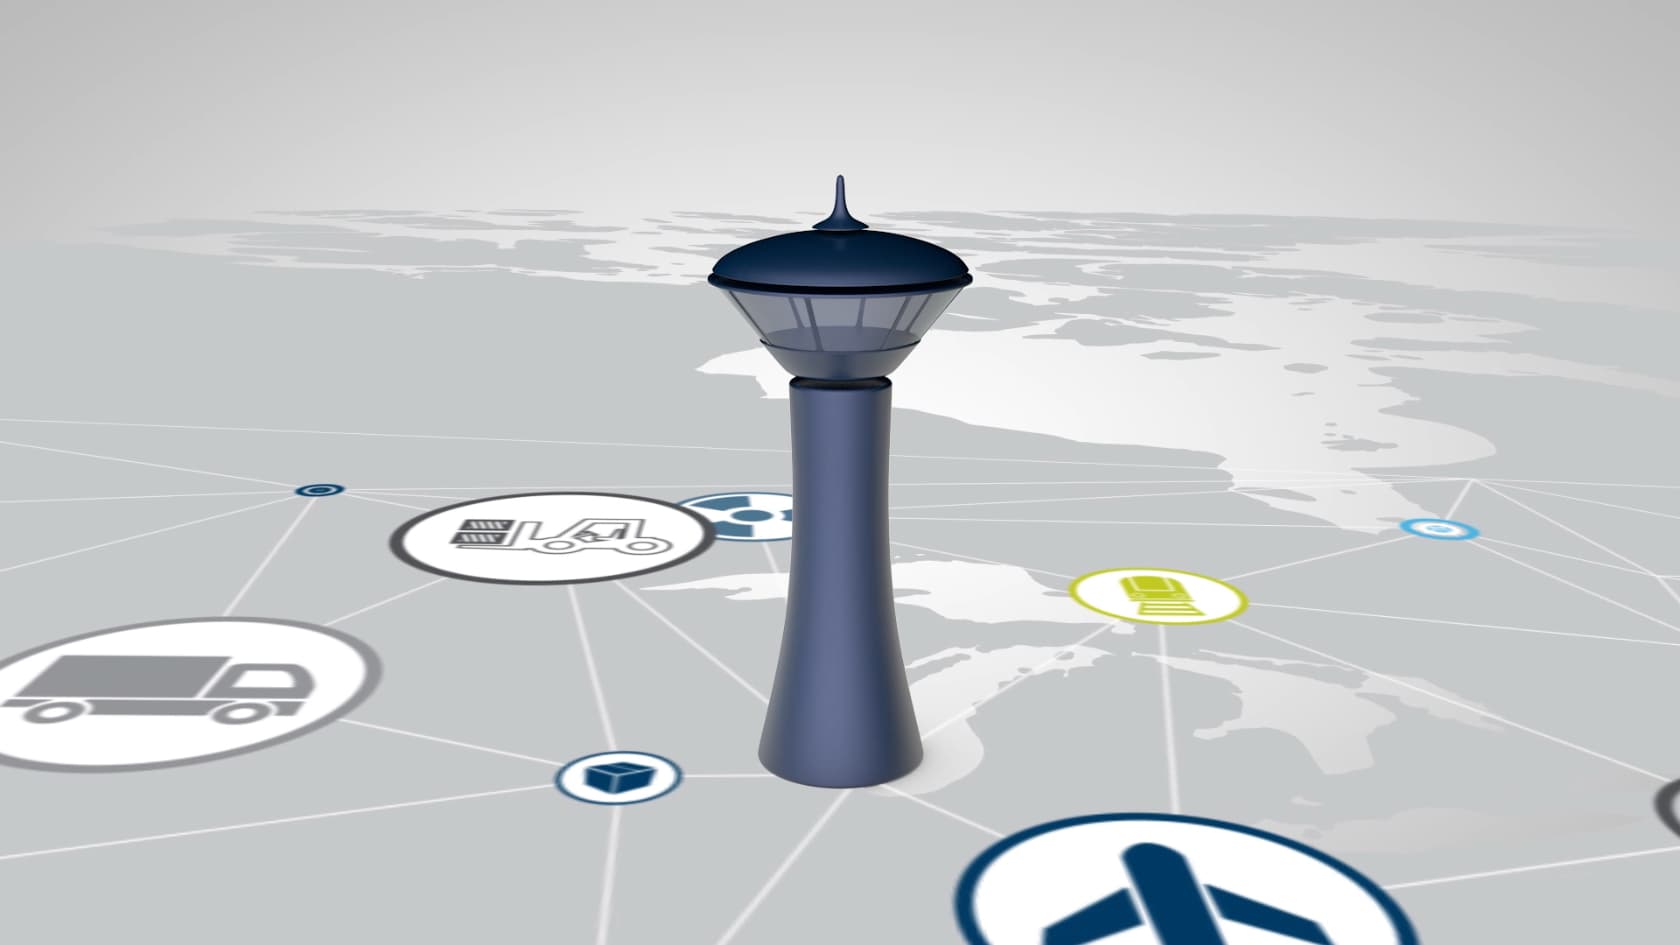 TMC, a divison of C.H. Robinson global control tower network